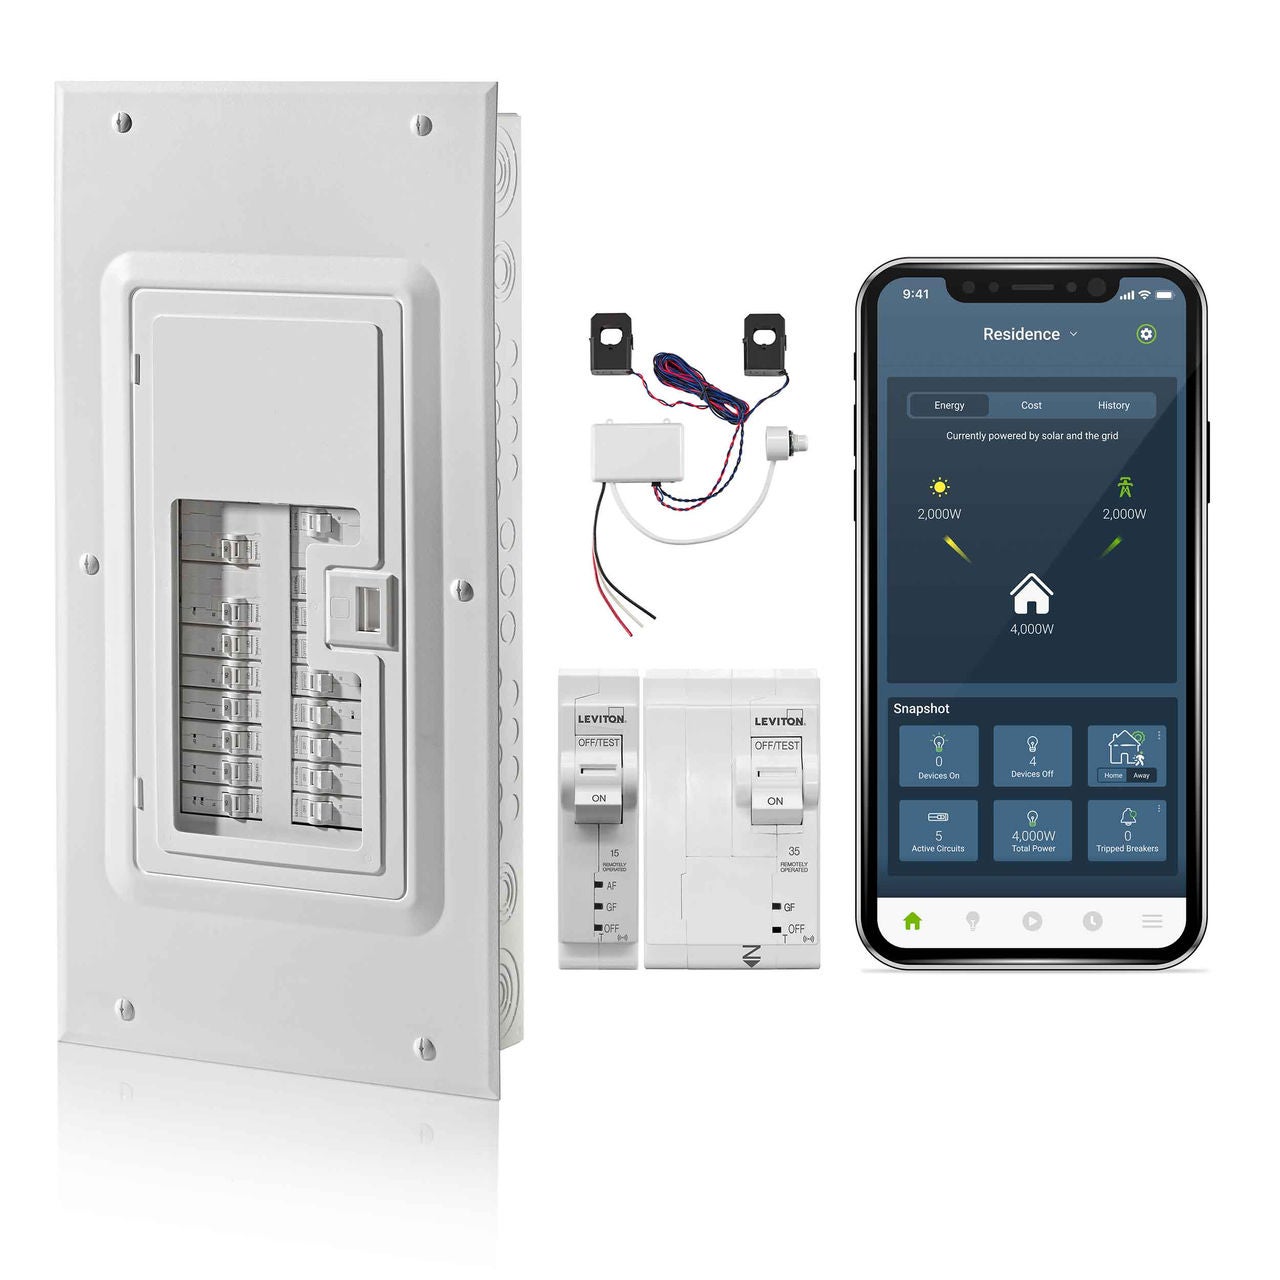 Smart Breakers, panel, LWHEM, and My Leviton Load Center App Screen